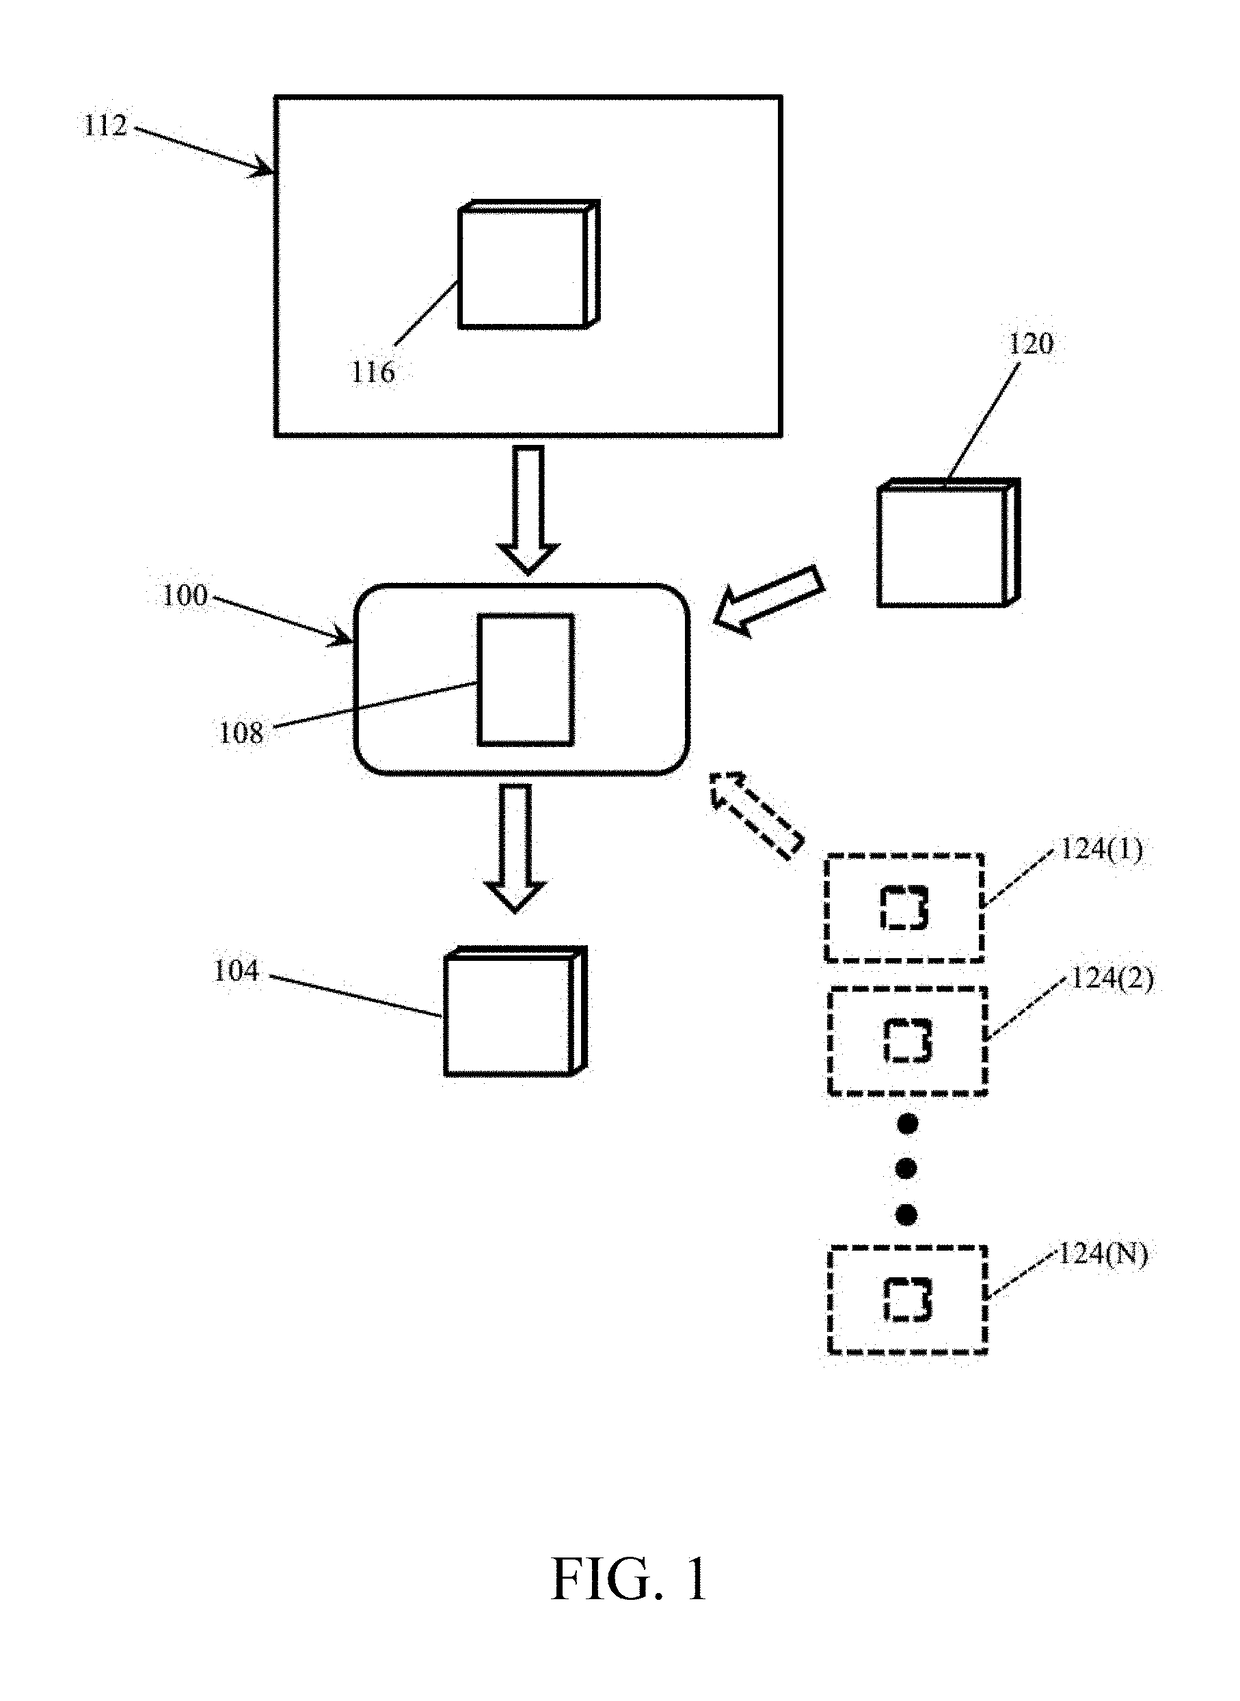 Methods and Software for Generating a Derived 3D Object Model From a Single 2D Image